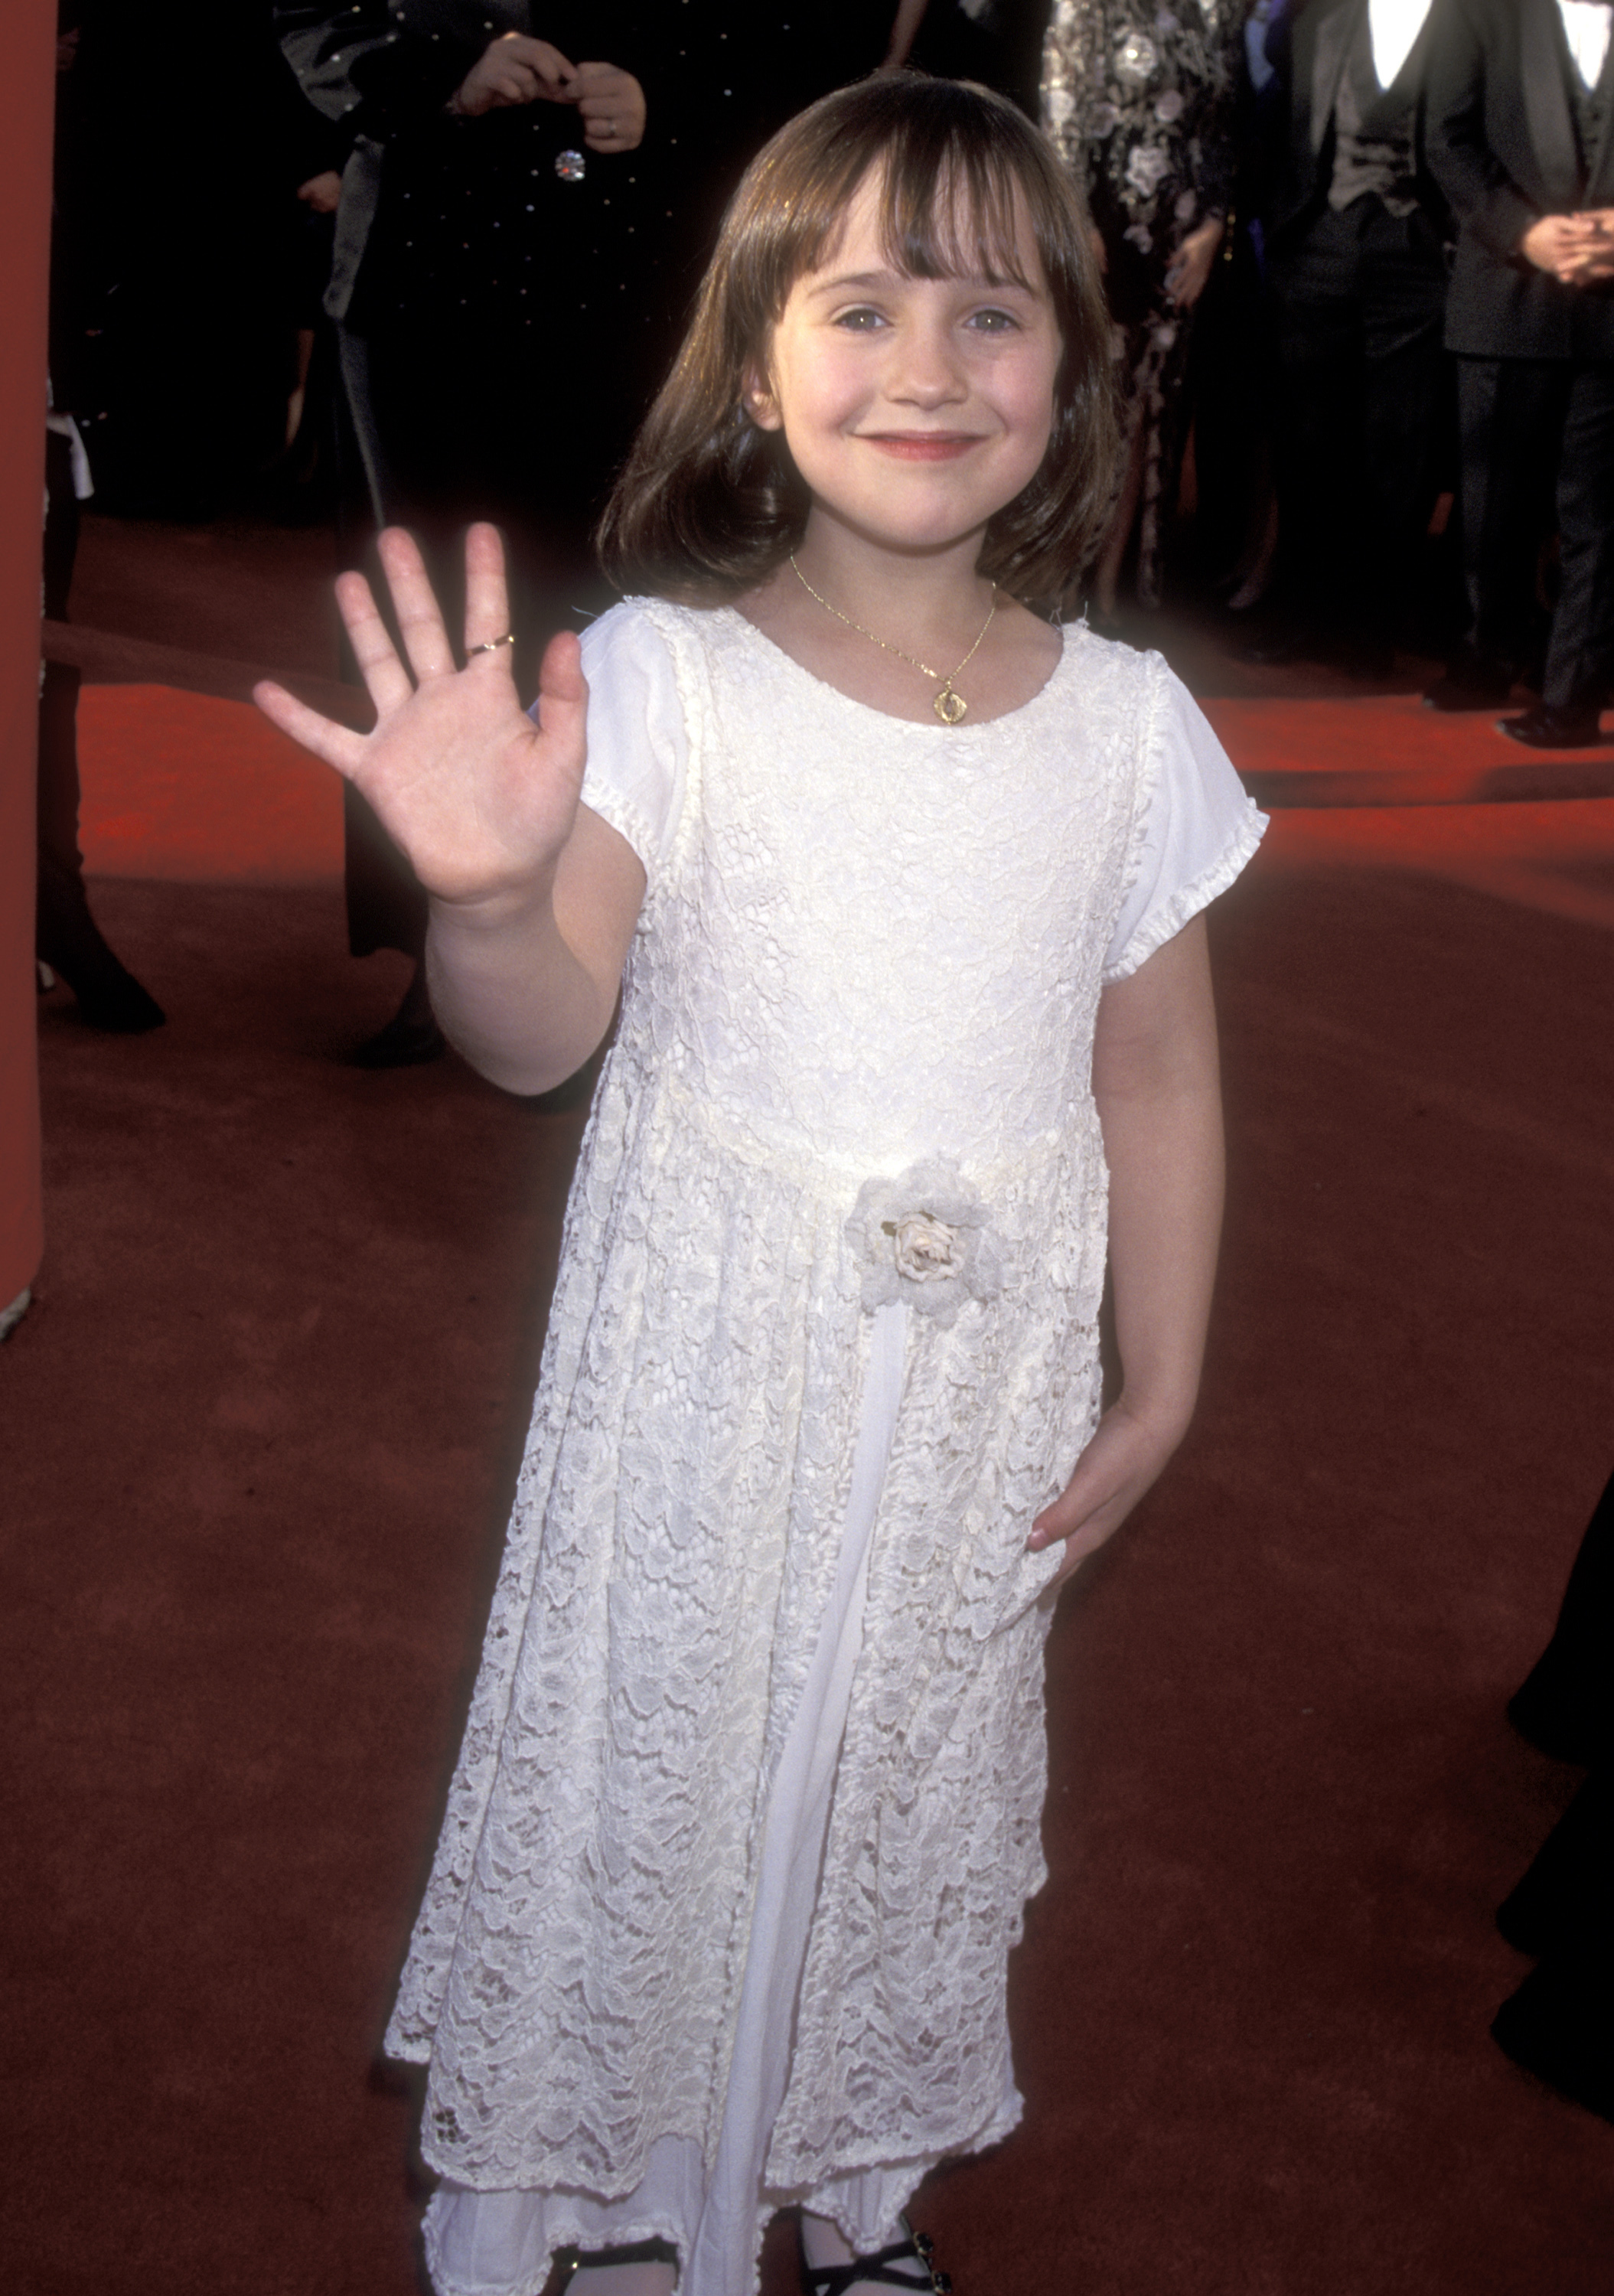 Mara Wilson attends the 67th Annual Academy Awards at Shrine Auditorium in Los Angeles, California, on March 27, 1995. | Source: Getty Images